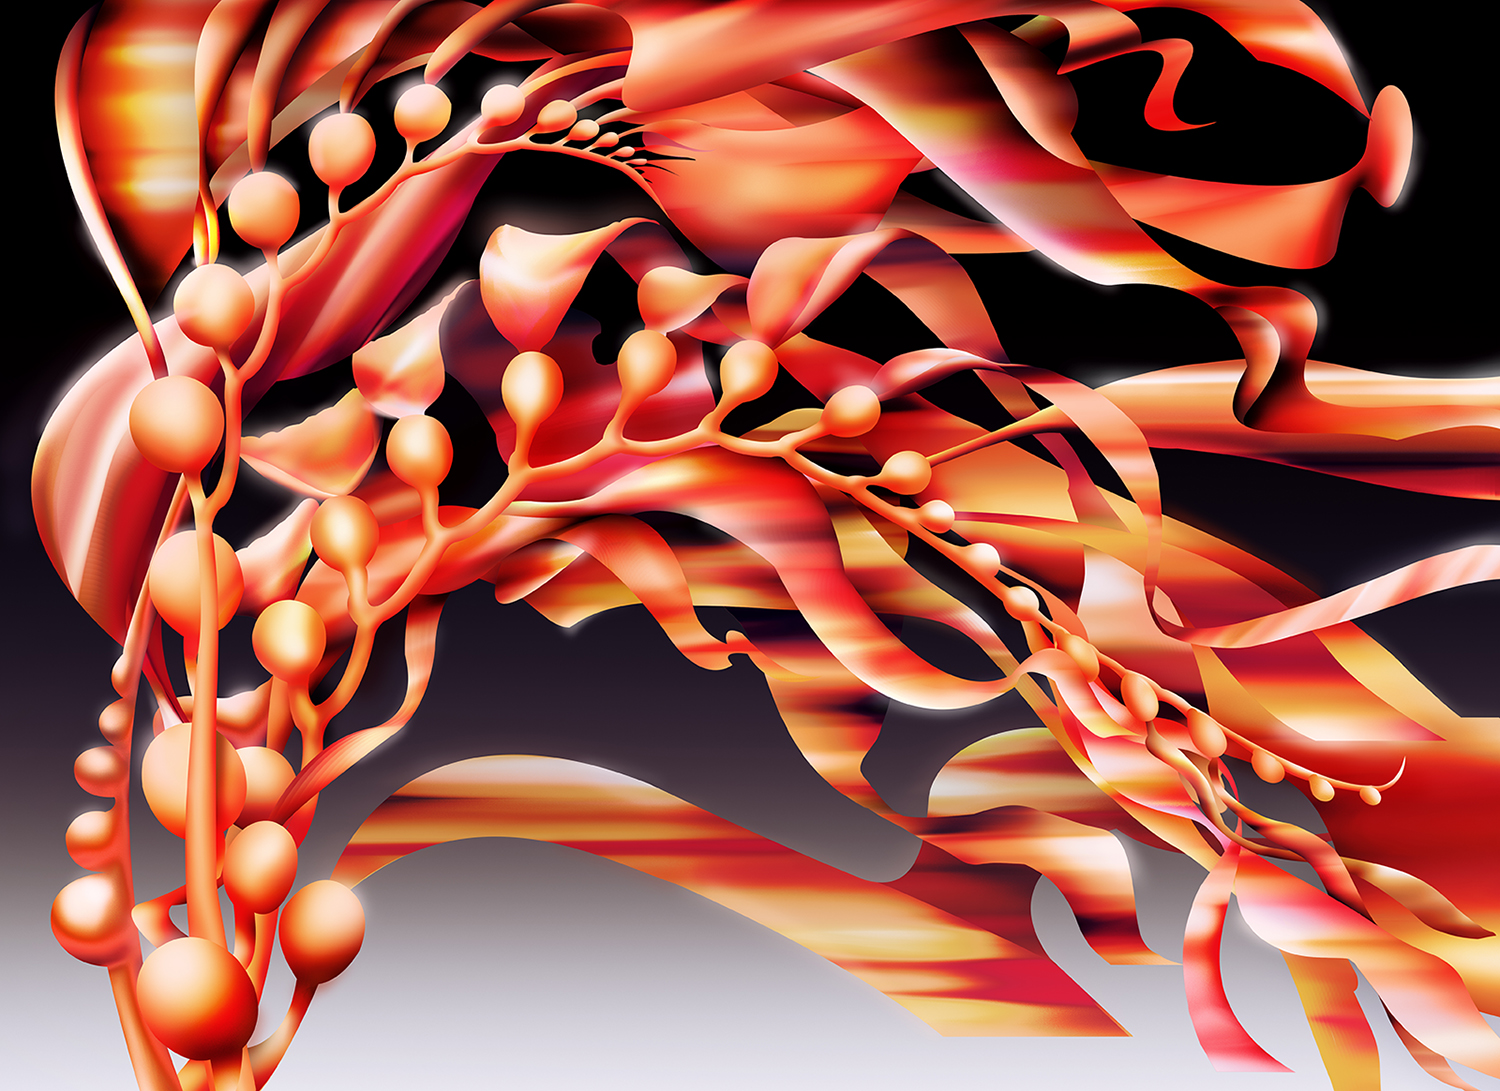 A hyperrealistic explosion of fire hued blades, floats and stems of a frond of seaweedoccupies the entire frame of the image.